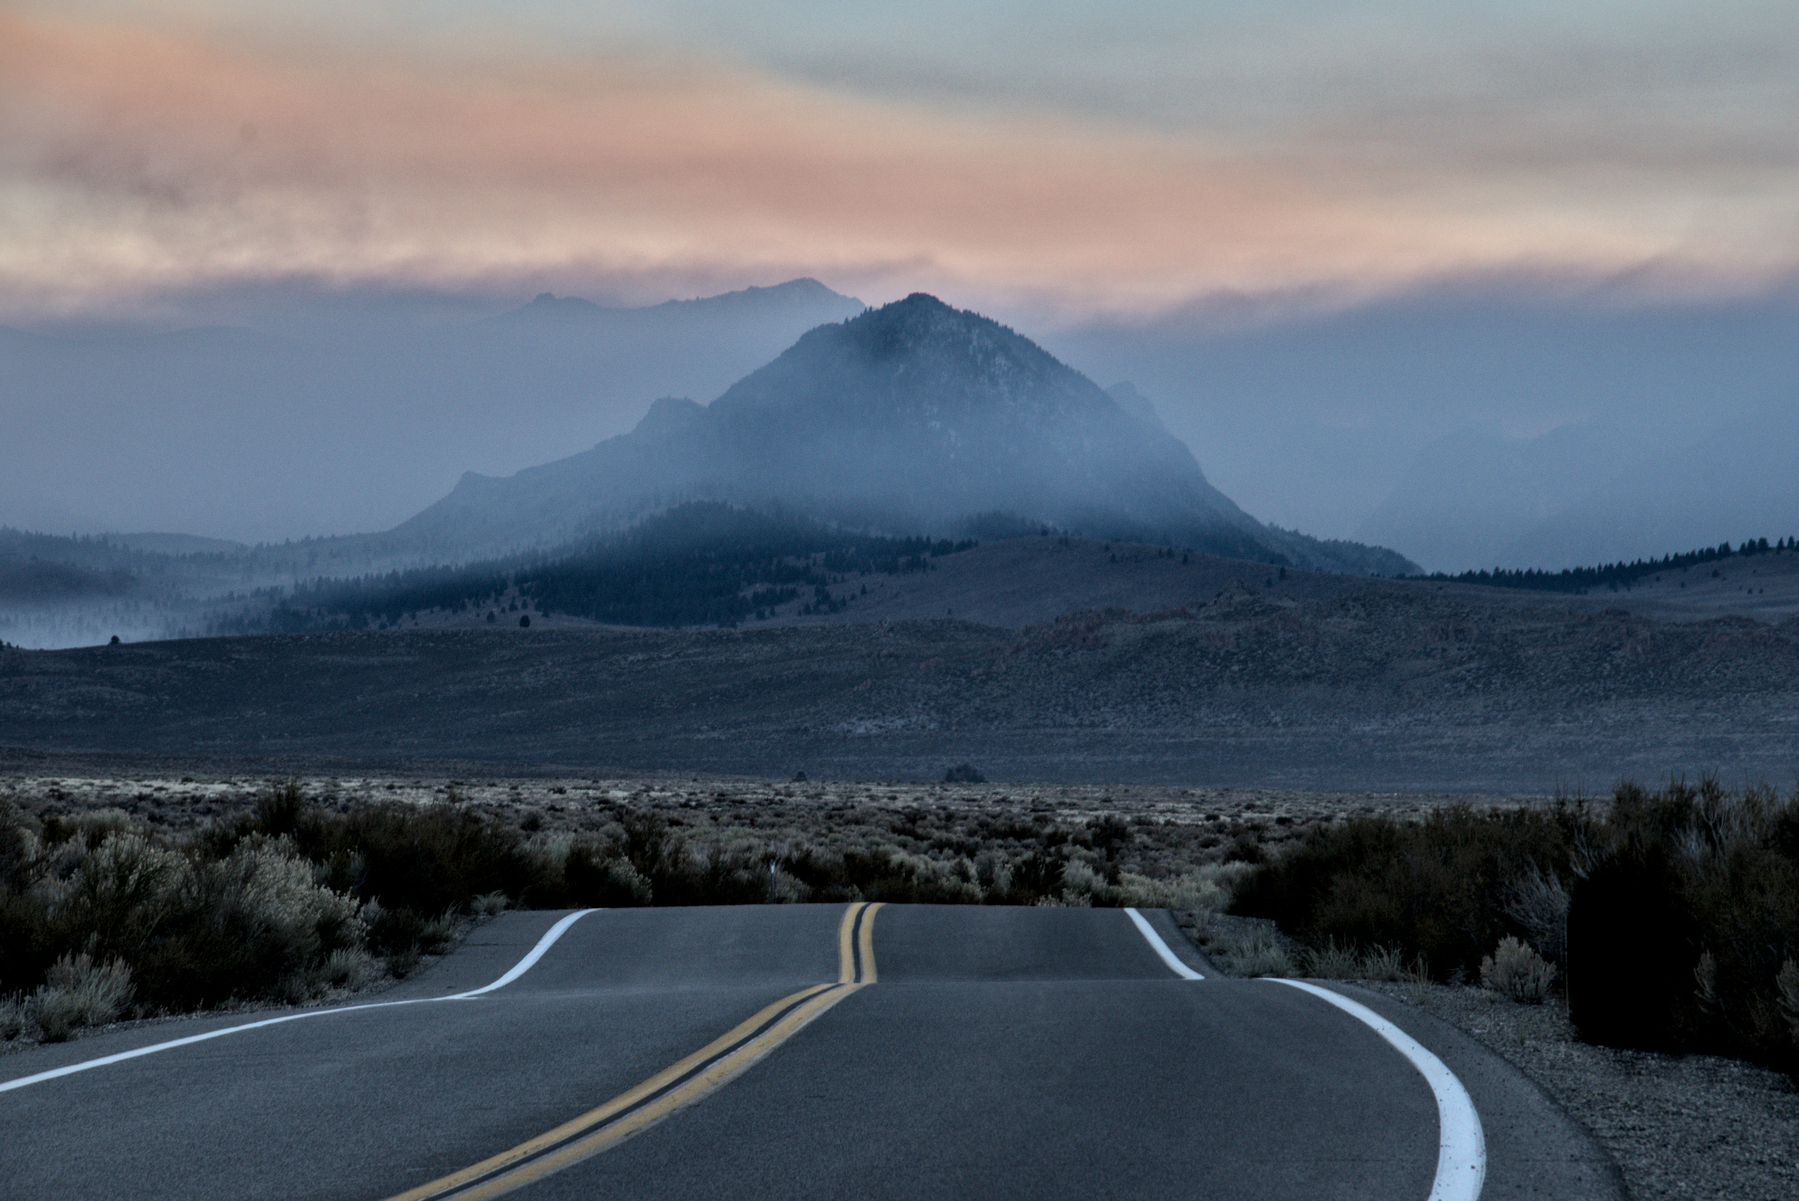 A rolling highway in the foreground opens up to a large valley surrounded by mountains, with a volcanic cinder cone in the middle.  Smoke drifts in from the left, partially obscuring the cinder cone.